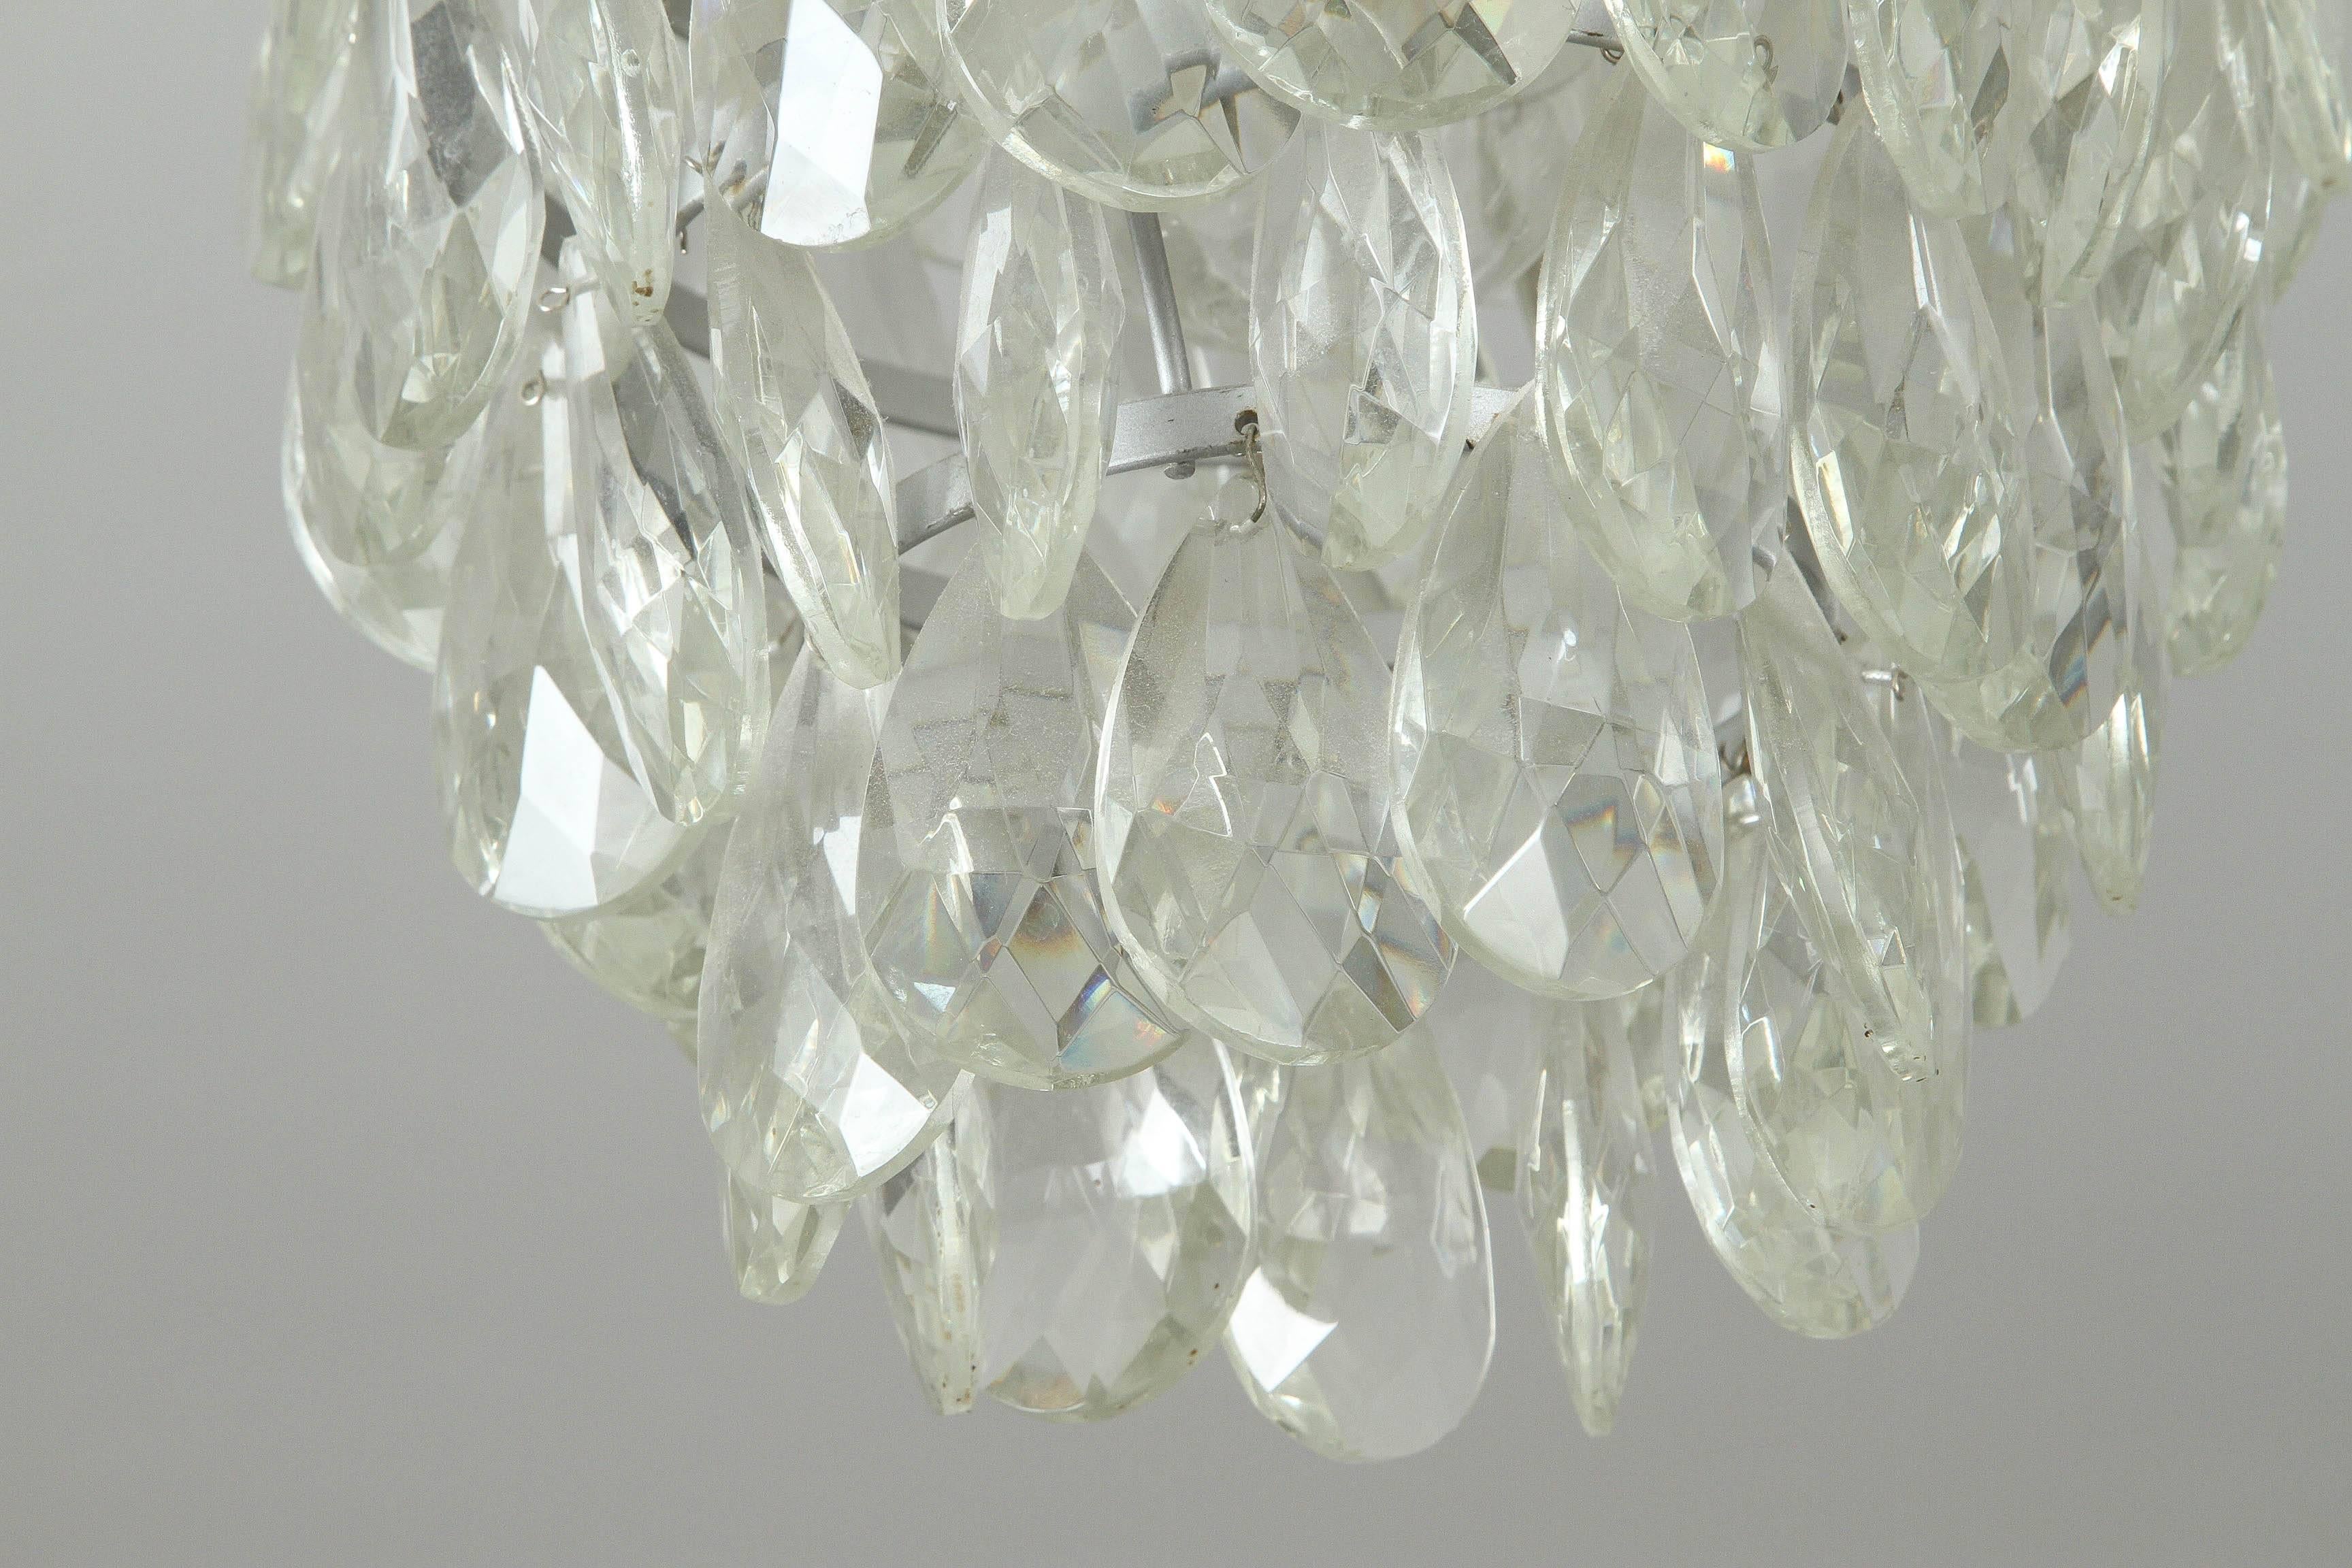 Pair of charming pendant lights with faceted glass teardrop petals.
The hardware has a bronze finish.